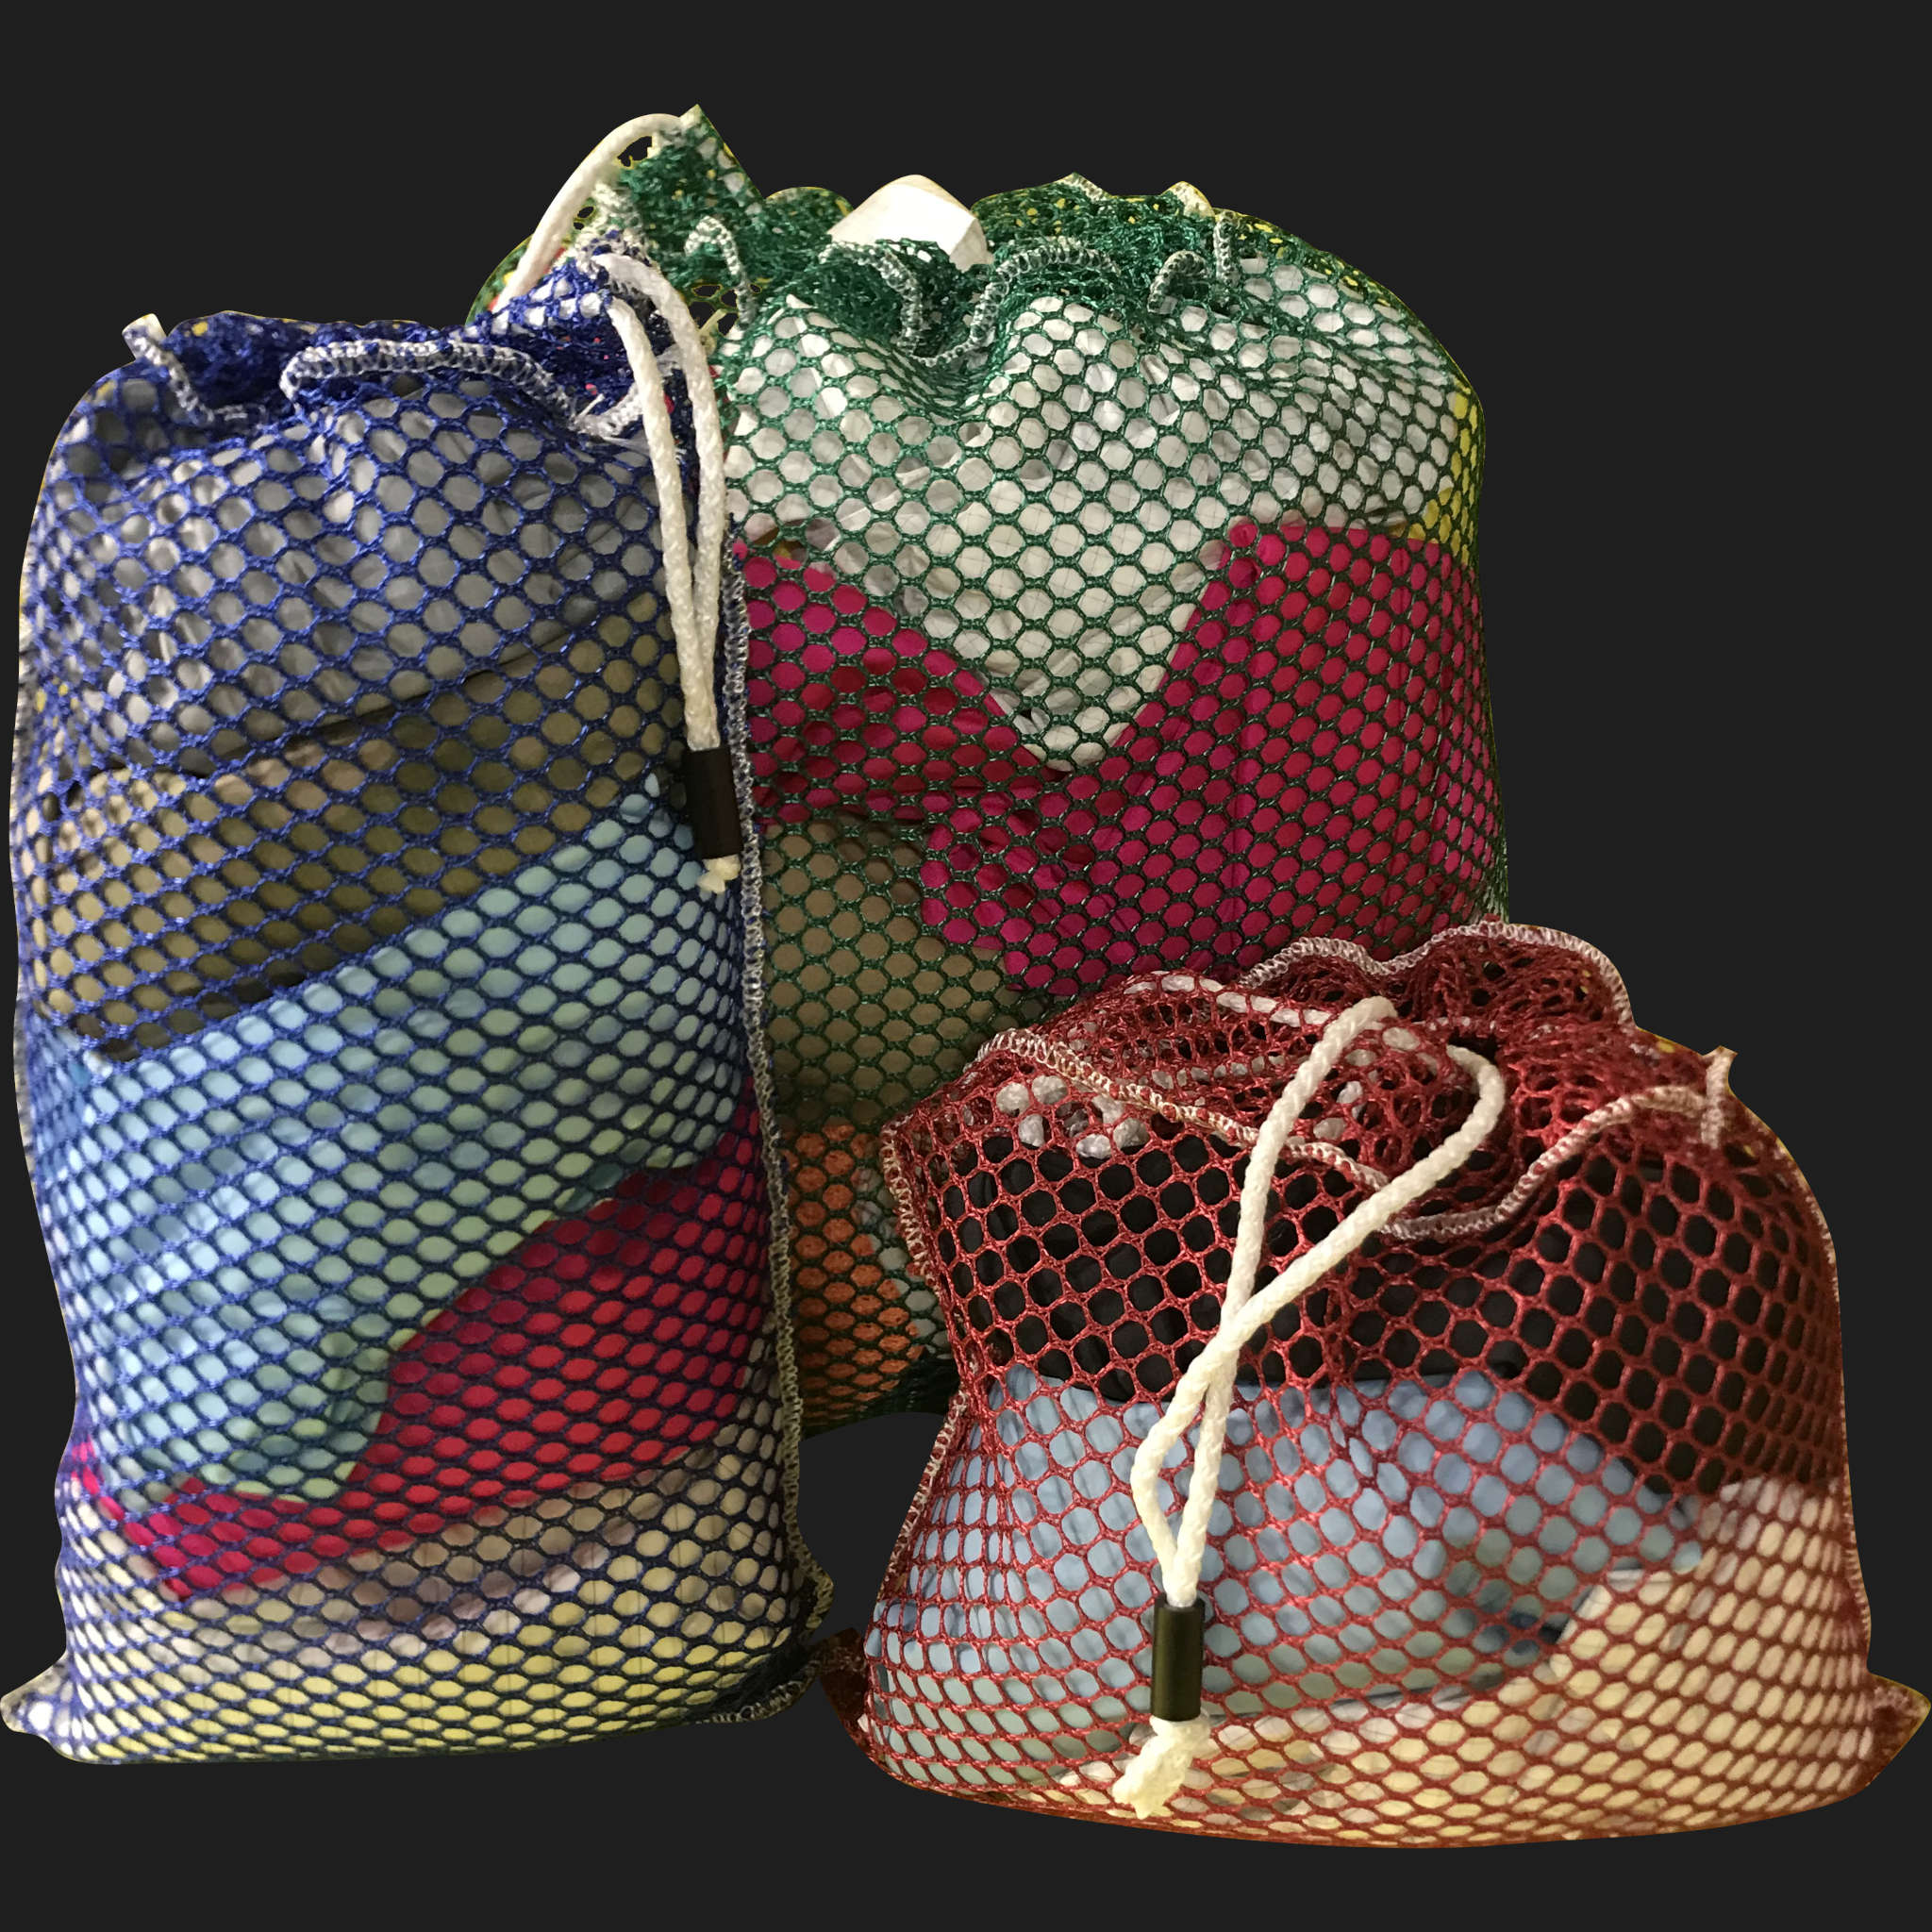 40" x 50" Customized Mesh-Net-Laundry Bags Heavy Duty with Cord and barrellock closure